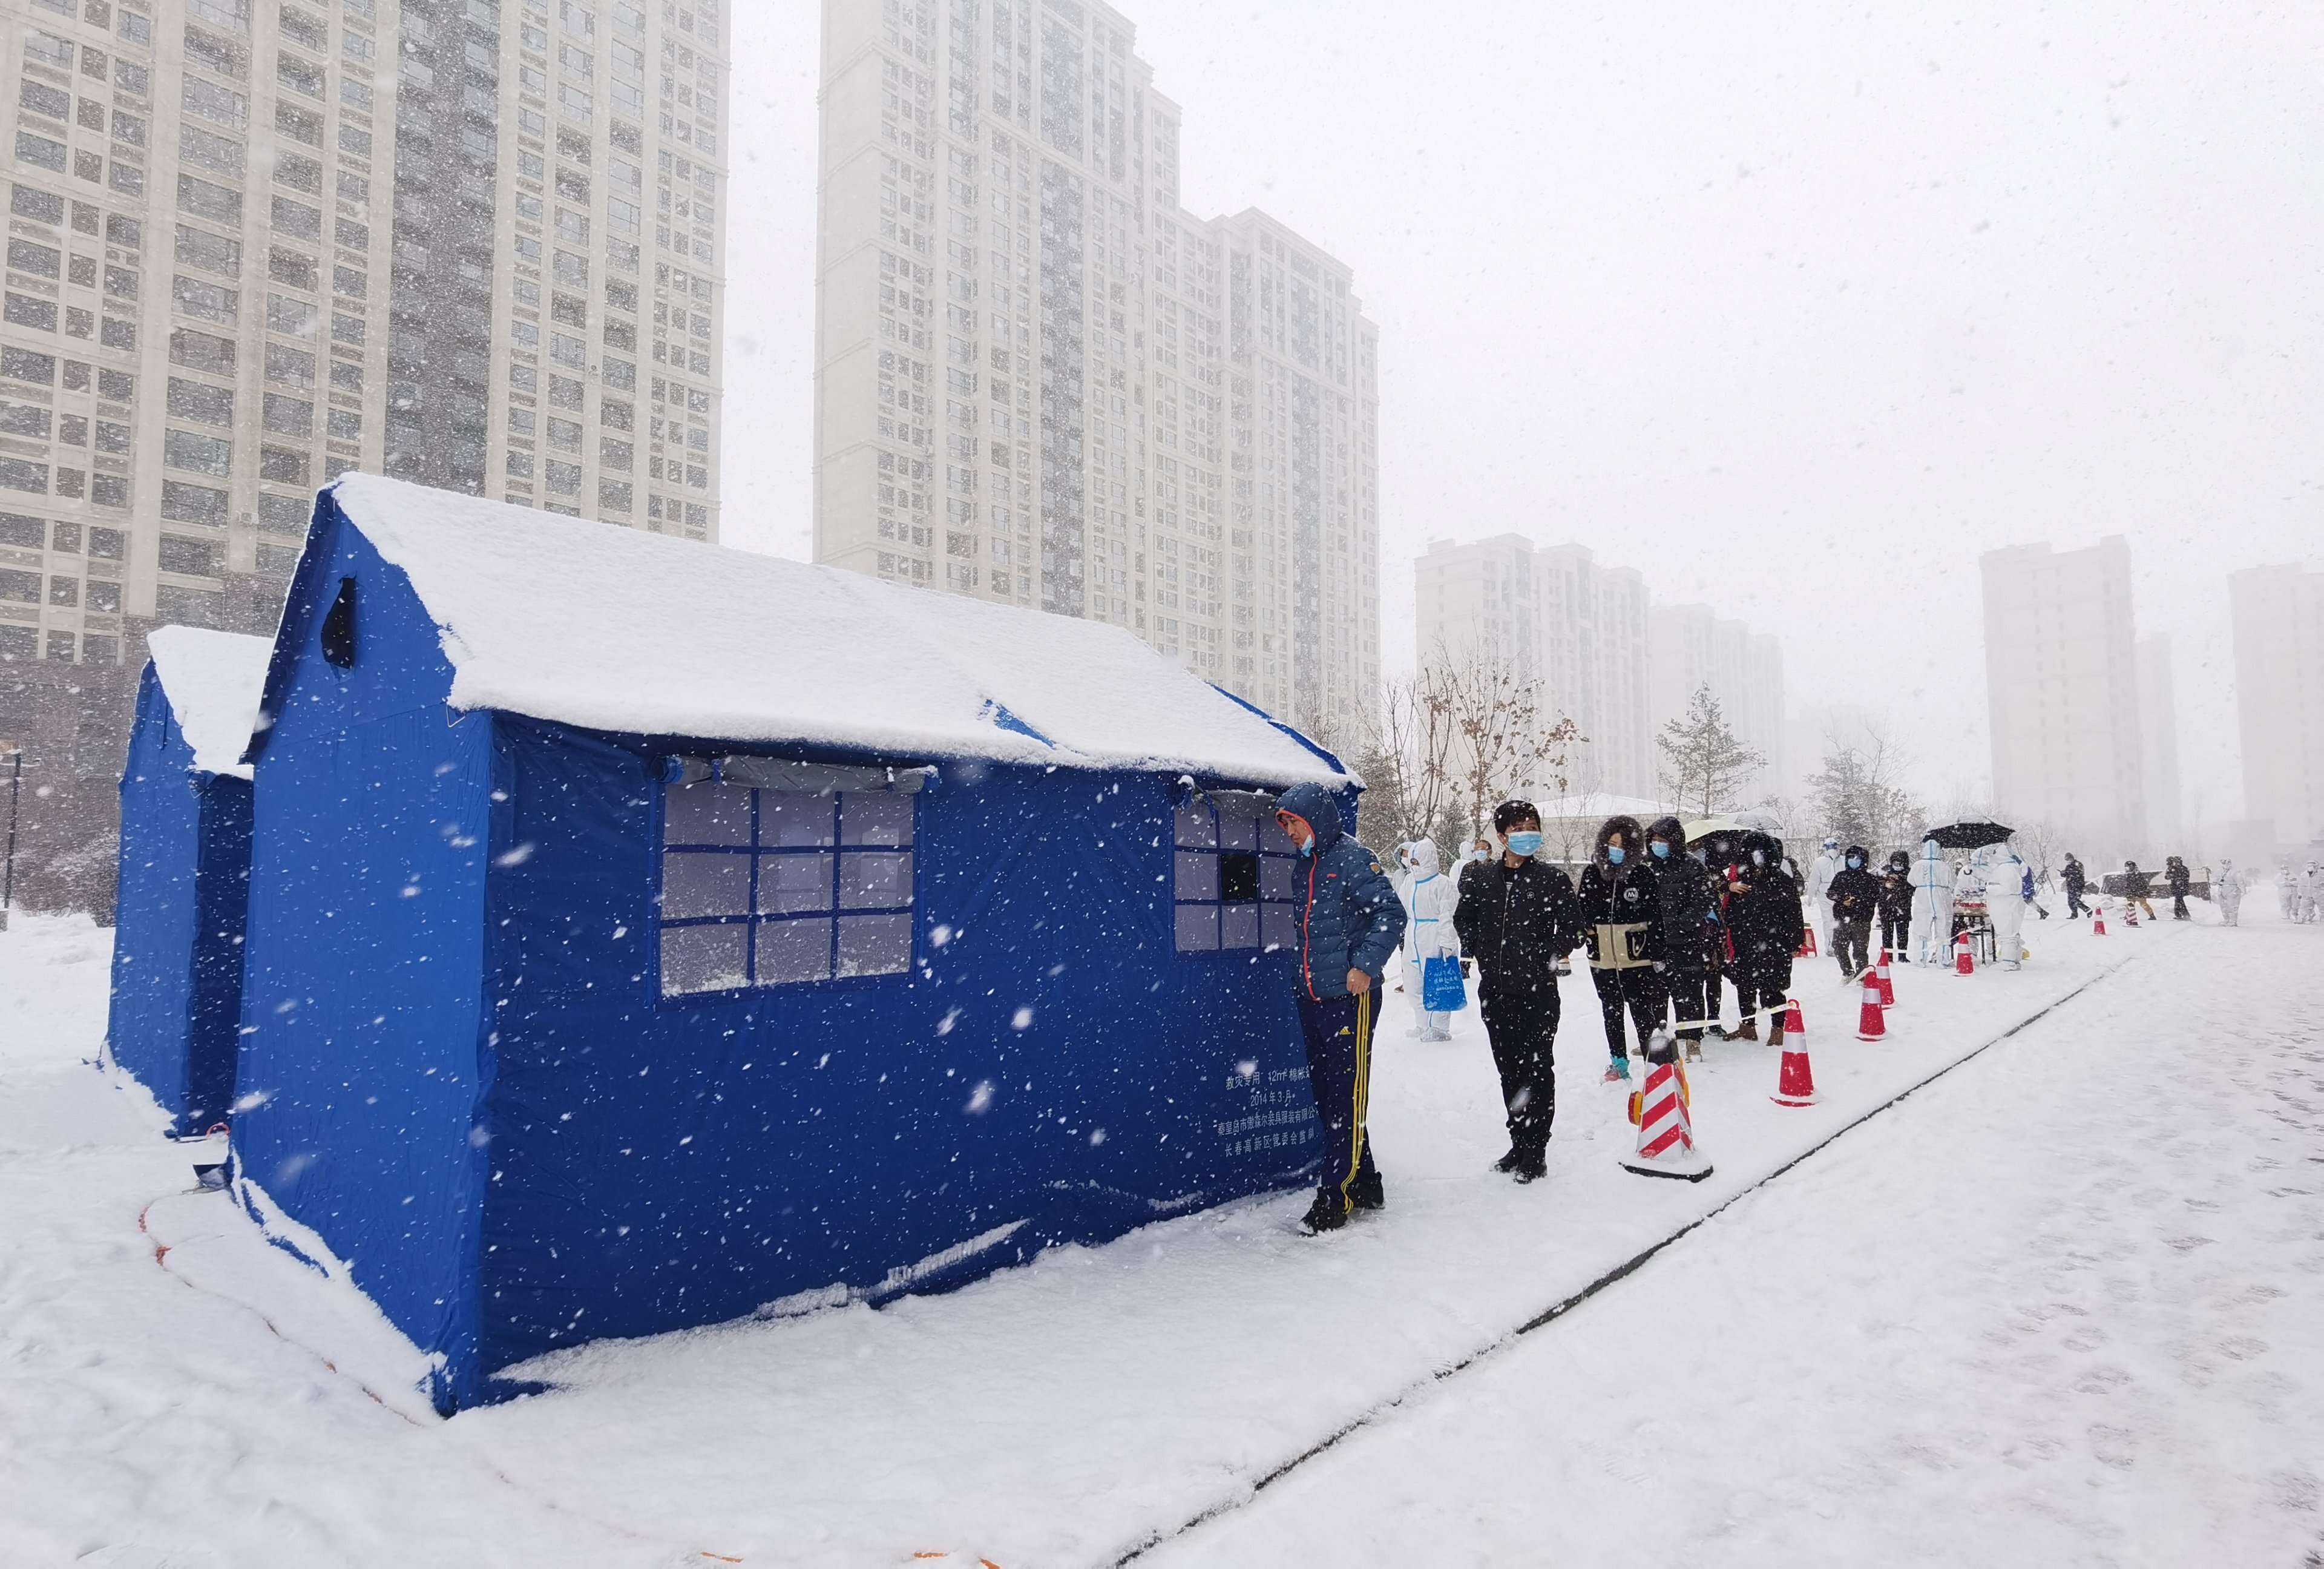 Residents of Changchun, Jilin province, line up for coronavirus testing. Authorities in the provincial capital will distribute cash and medical supplies to more than 50,000 people. Photo: Reuters